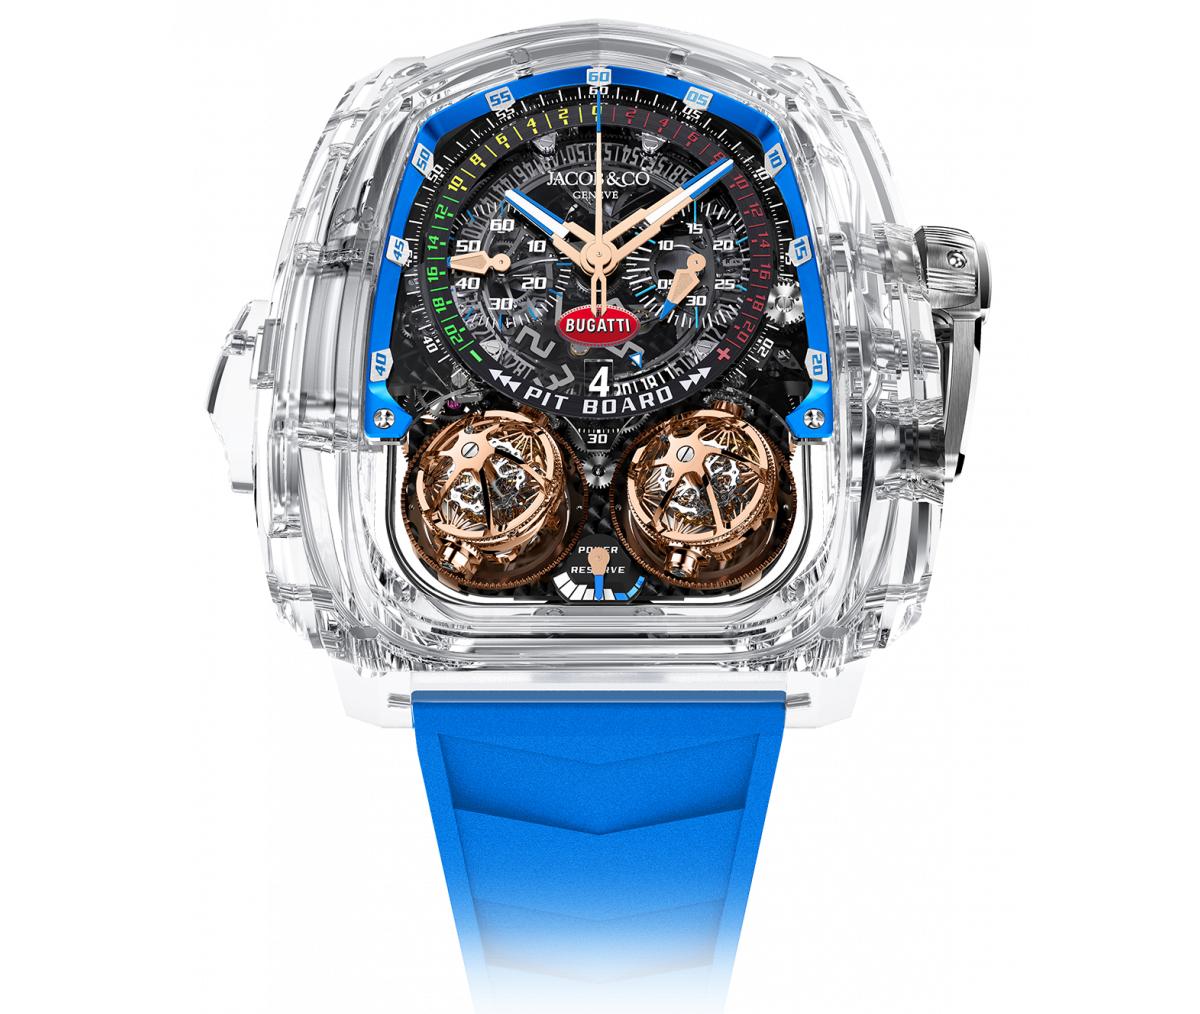 Jacob & Co.?s newest Bugatti-themed limited-edition is the first watch ever to feature a decimal repeater in a sapphire crystal case